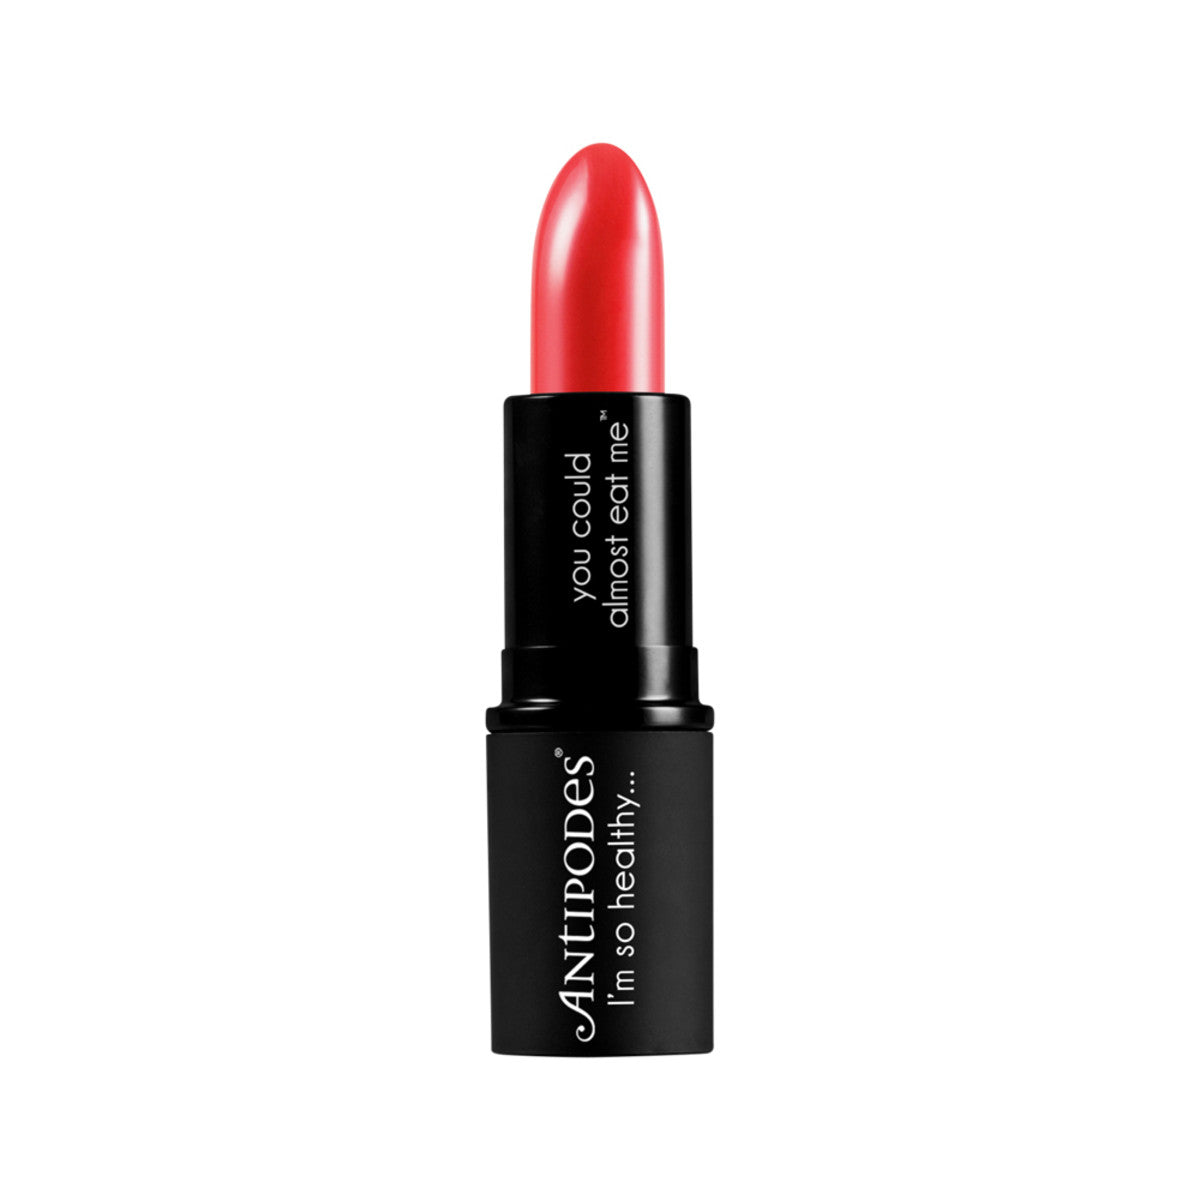 Antipodes - Lipstick South Pacific Coral